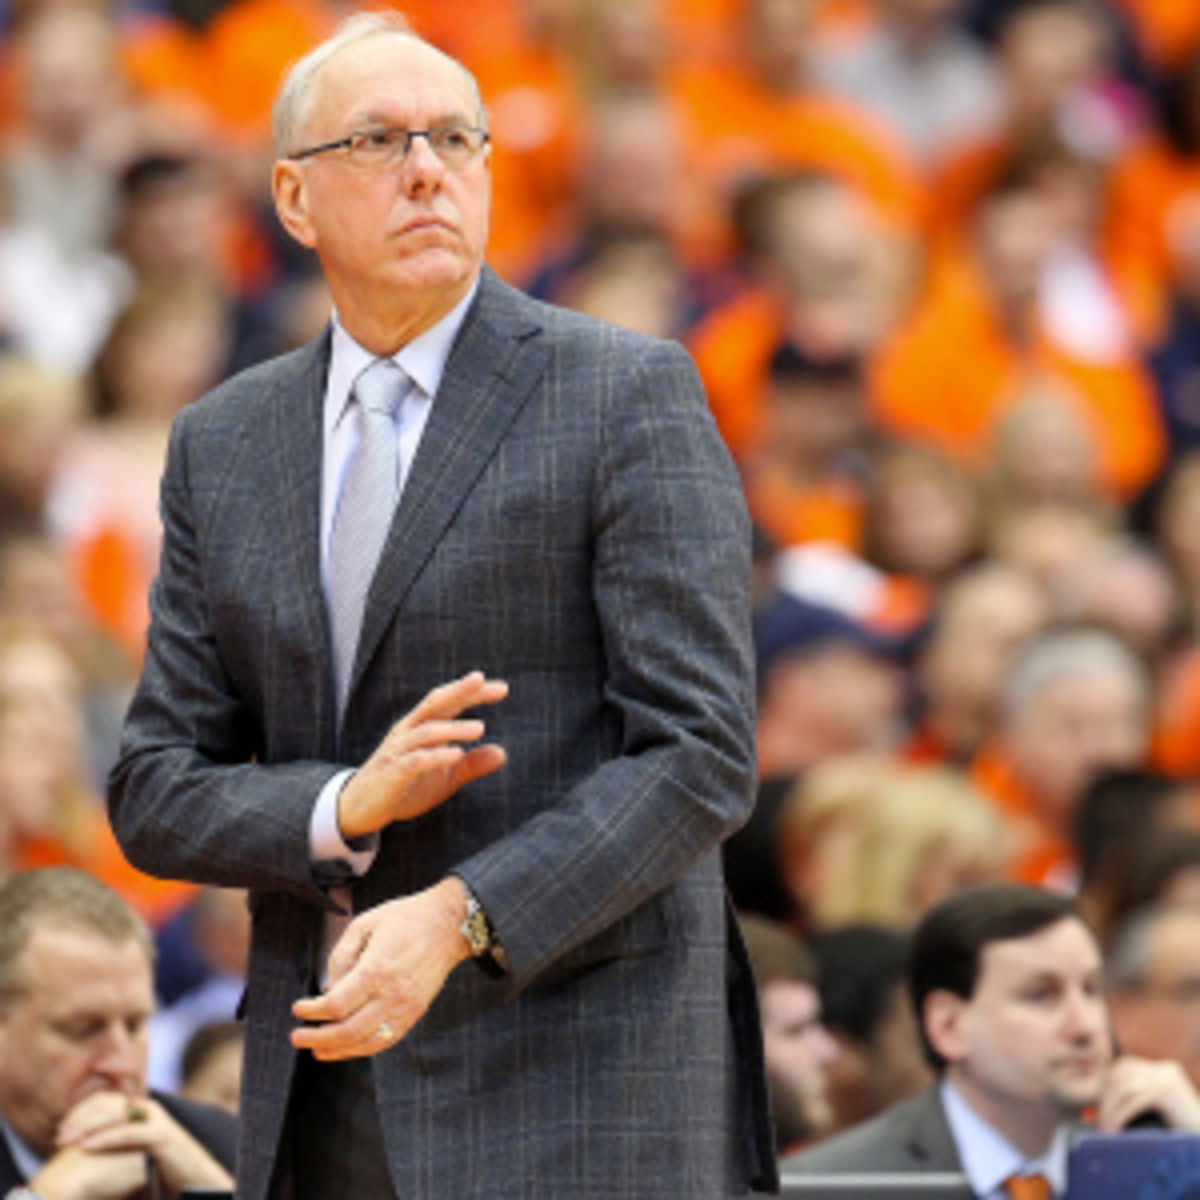 Syracuse University tweeted, then deleted, that Jim Boeheim may be asked to retire. (Nate Shron/Getty Images)